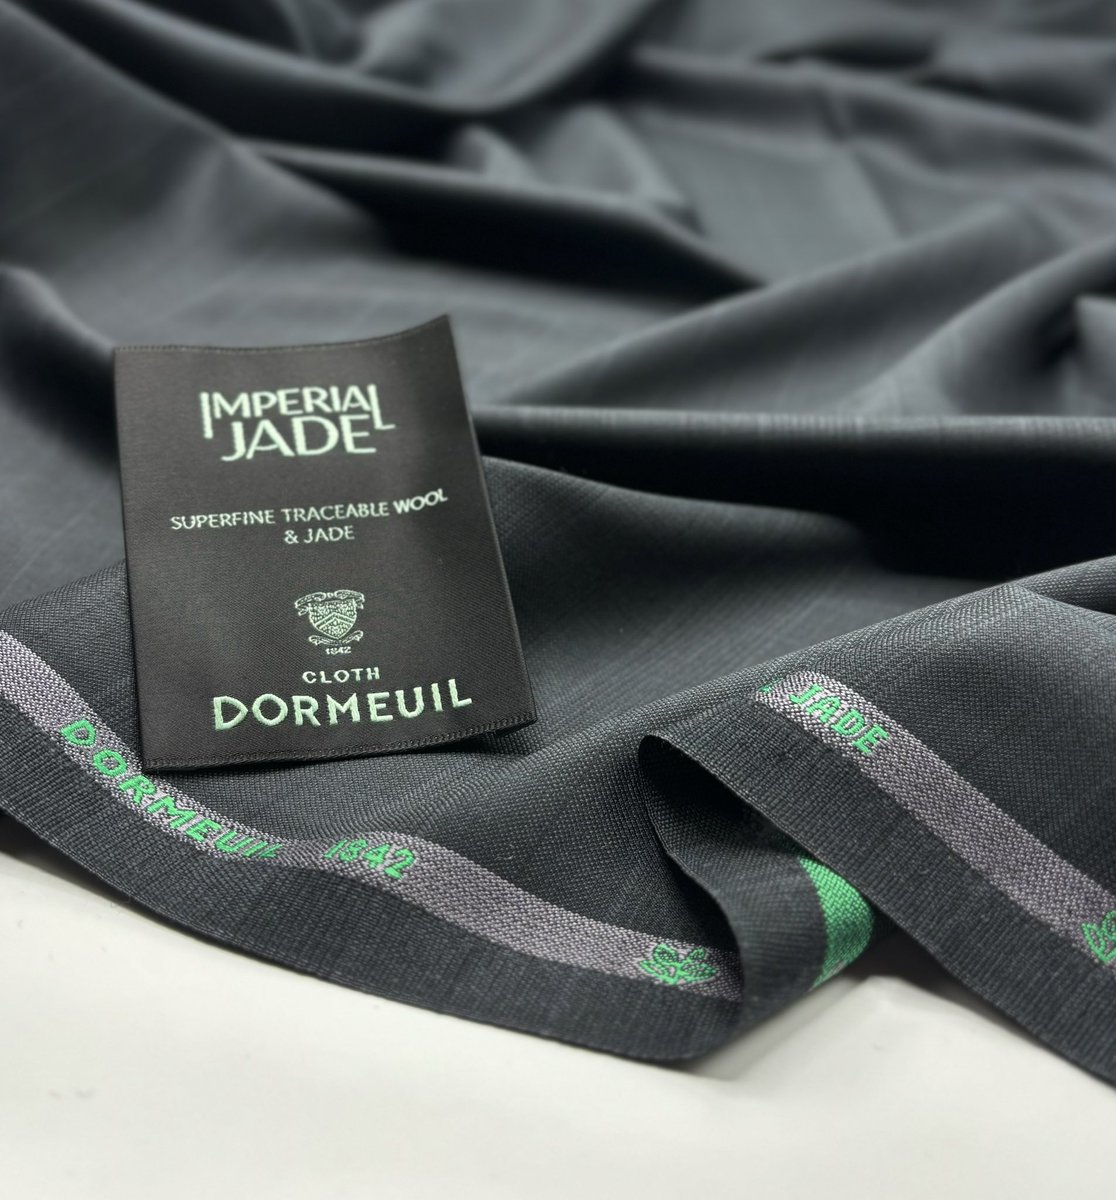 Super 140s all wool , Imperial Jade by Dormeuil. Simply beautiful and elegant. Online now kabbanitextiles.com #jade #wool #tailoring #dormeuil #madeinengland #green